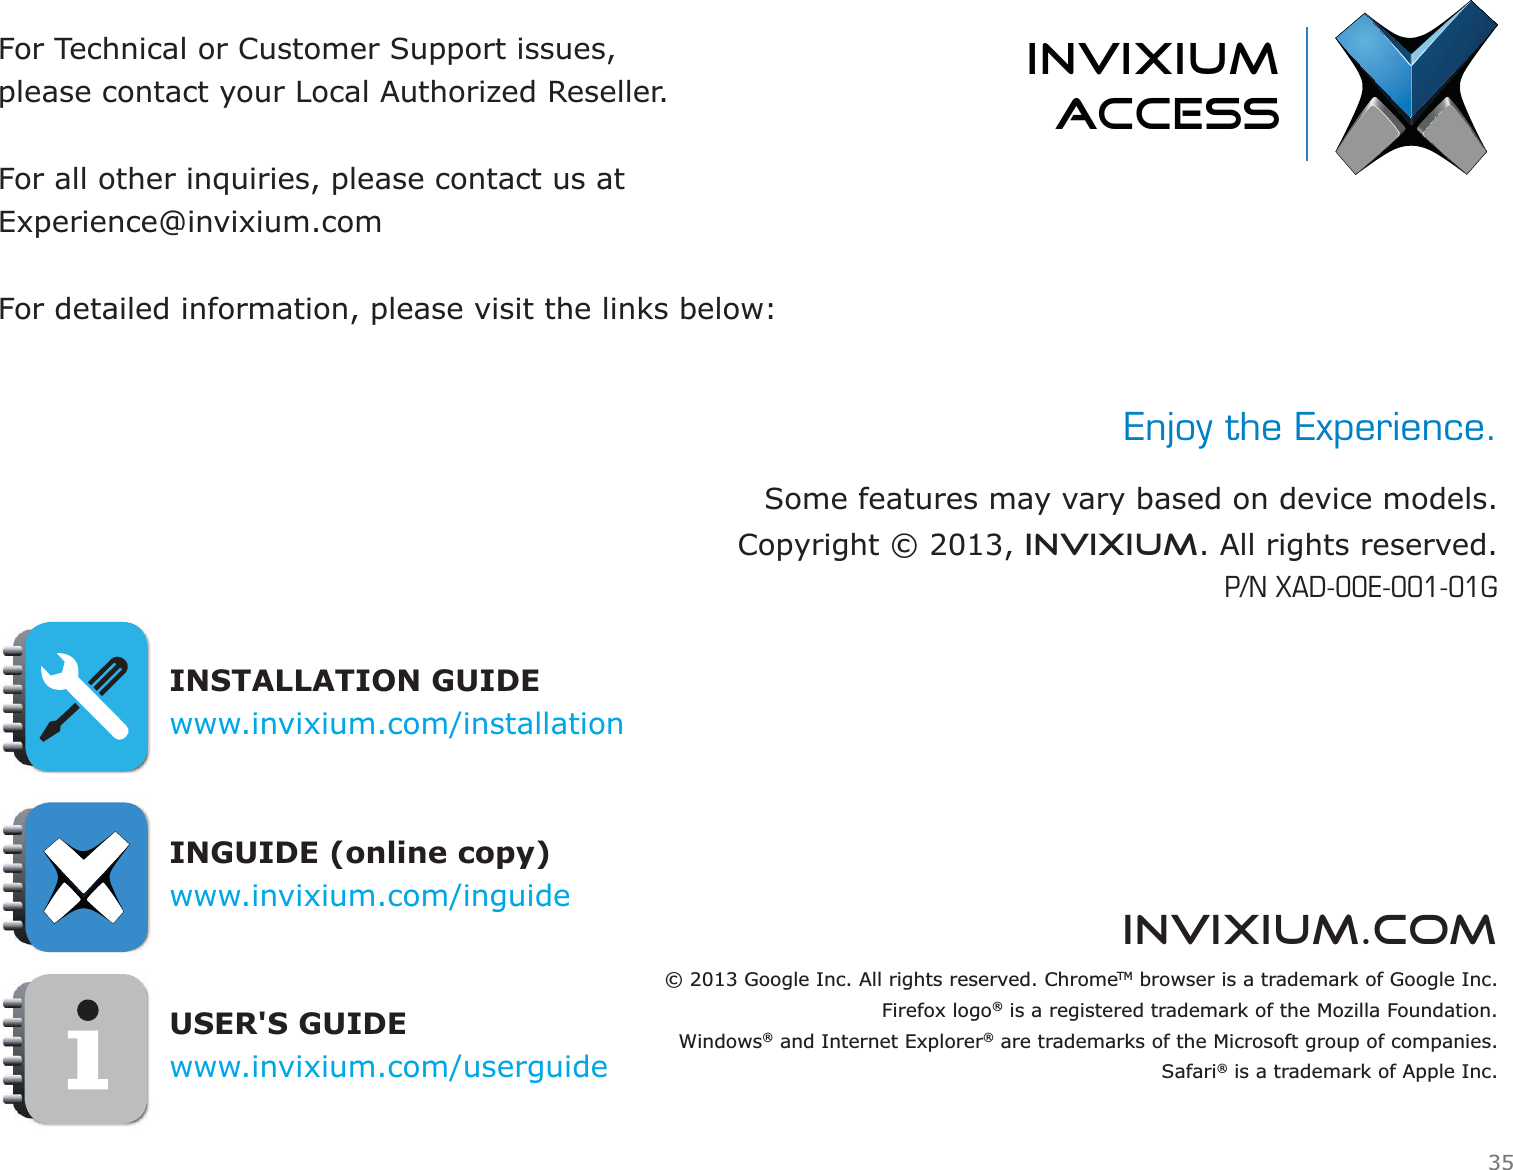 invixium.comFor Technical or Customer Support issues, please contact your Local Authorized Reseller.For all other inquiries, please contact us atExperience@invixium.comFor detailed information, please visit the links below:INSTALLATION GUIDEwww.invixium.com/installation INGUIDE (online copy)www.invixium.com/inguideUSER&apos;S GUIDEwww.invixium.com/userguideinvixiumaccessEnjoy the Experience.Some features may vary based on device models.Copyright © 2013, INVIXIUM. All rights reserved.P/N XAD-00E-001-01G© 2013 Google Inc. All rights reserved. ChromeTM browser is a trademark of Google Inc.Firefox logo® is a registered trademark of the Mozilla Foundation.Windows® and Internet Explorer® are trademarks of the Microsoft group of companies.Safari® is a trademark of Apple Inc.35